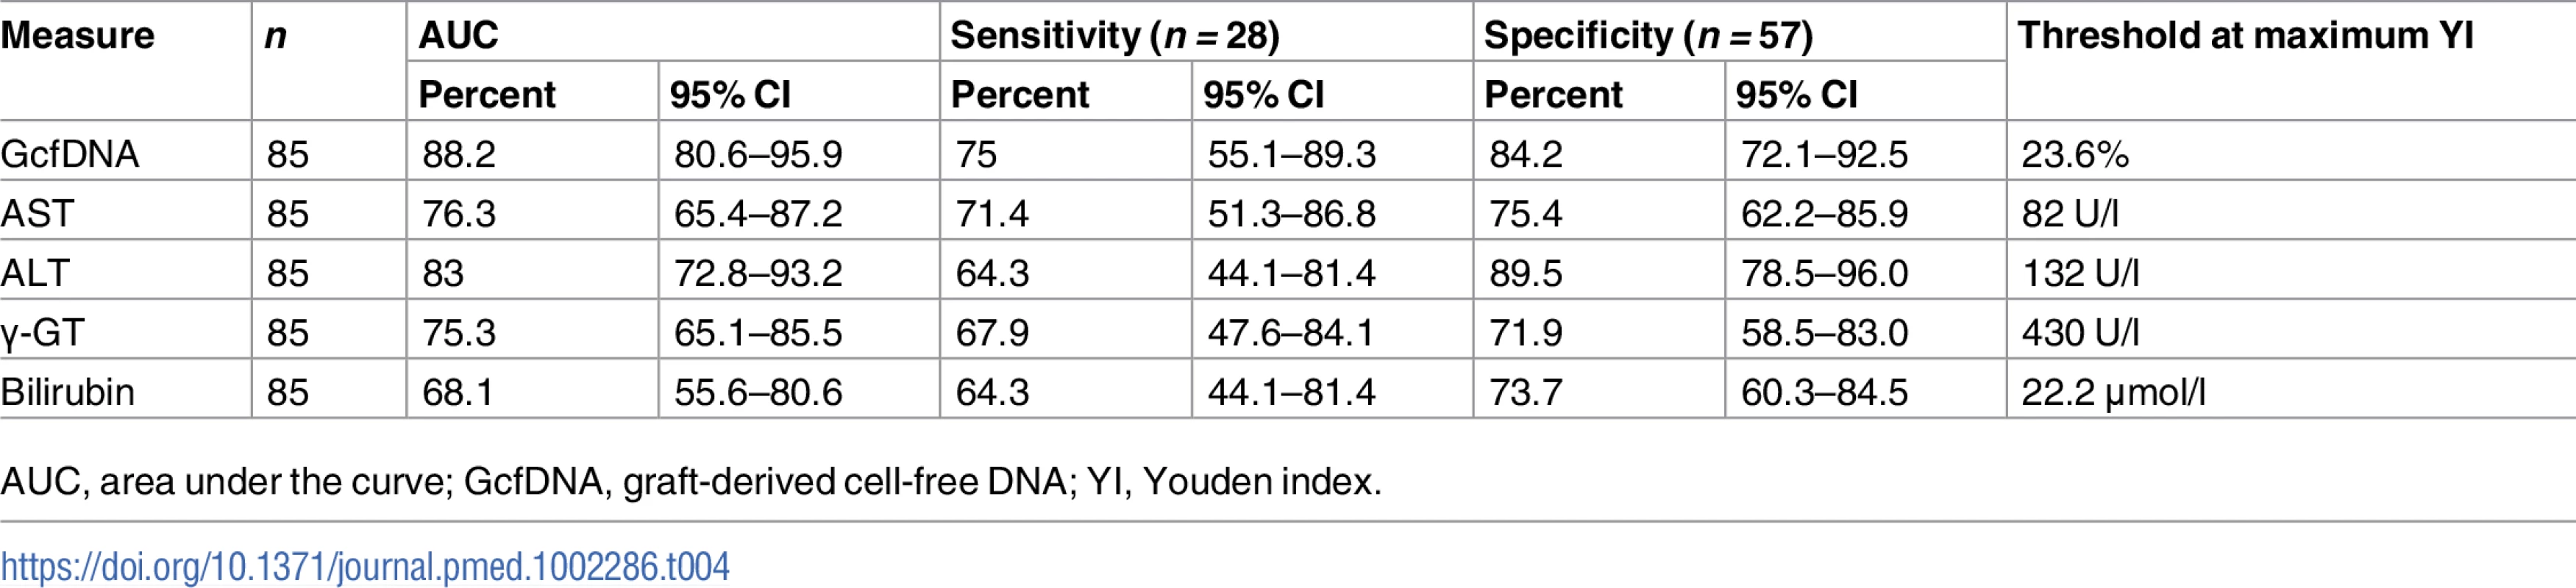 Youden-index-based diagnostic sensitivity and specificity obtained from receiver operator characteristic curves in rejection versus HCV+ samples.